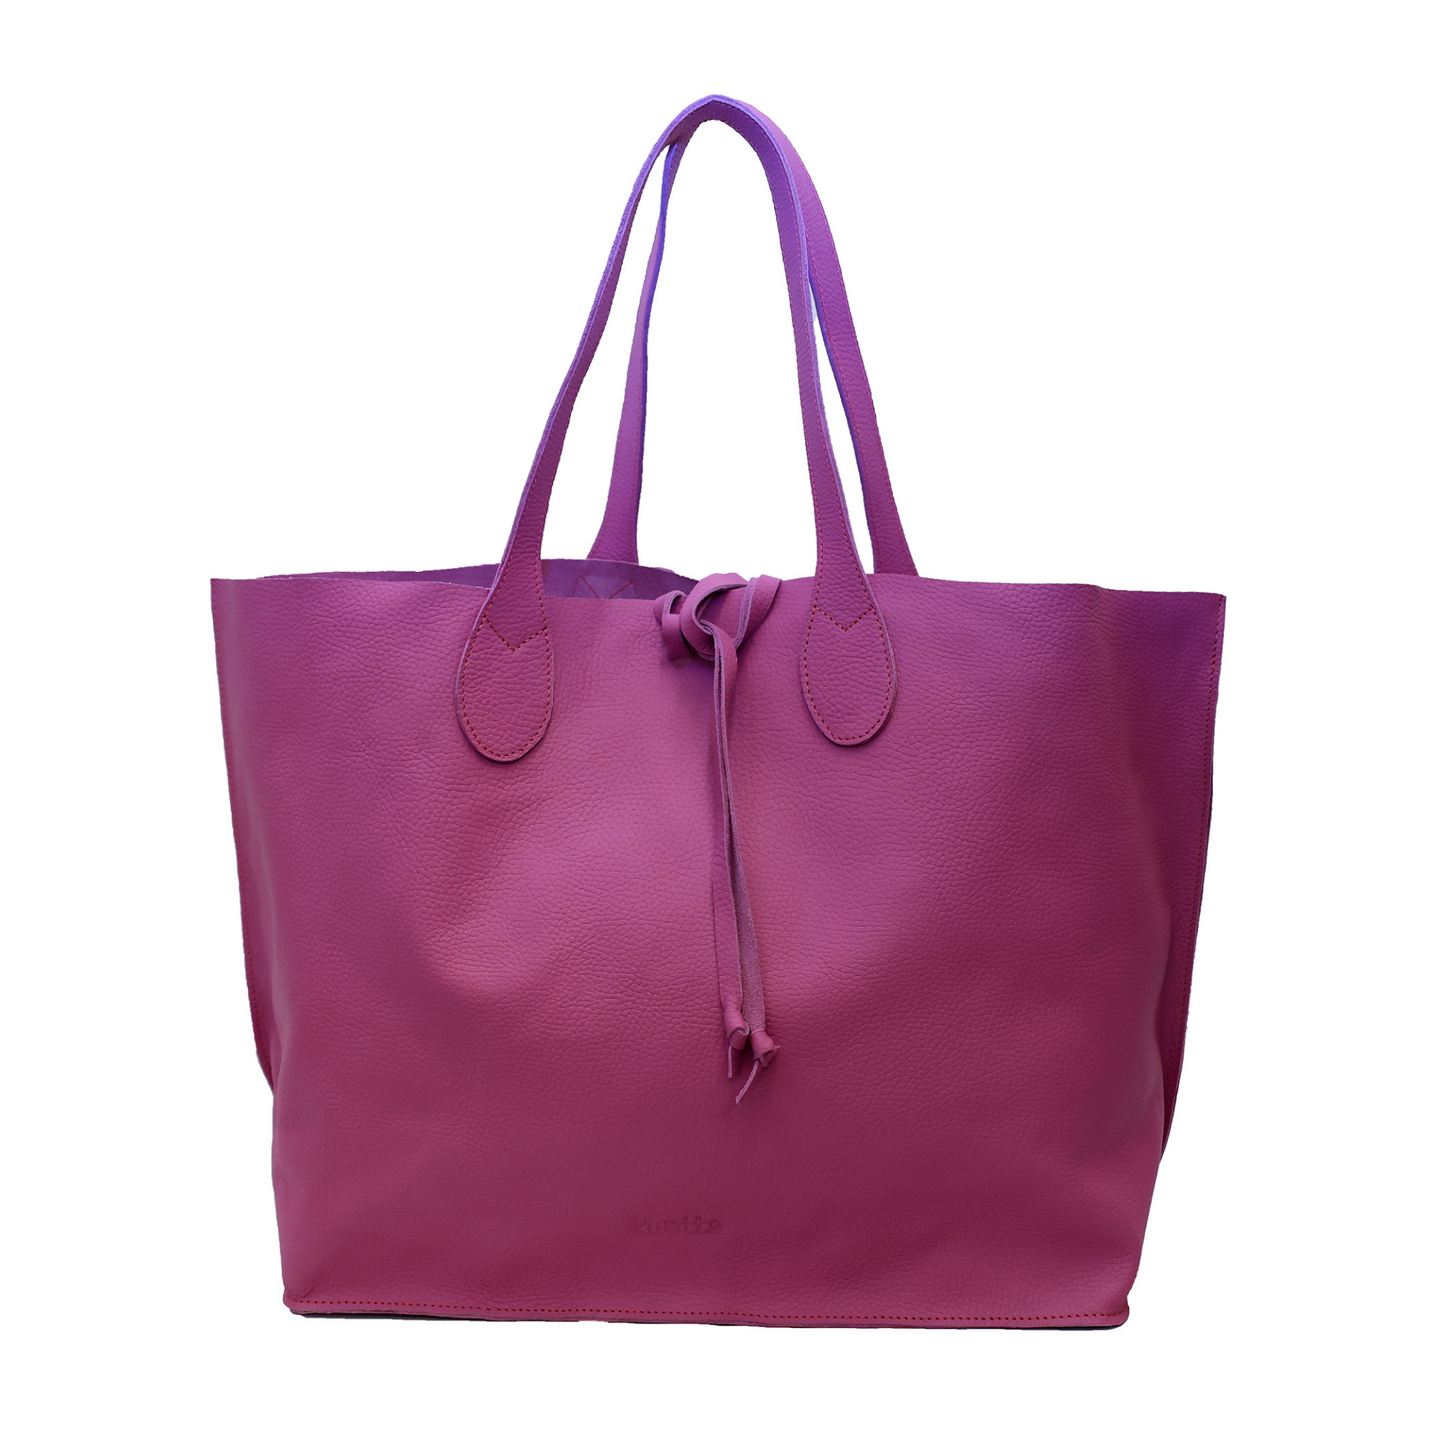 Francesca tote in Radiant orchid milled leather